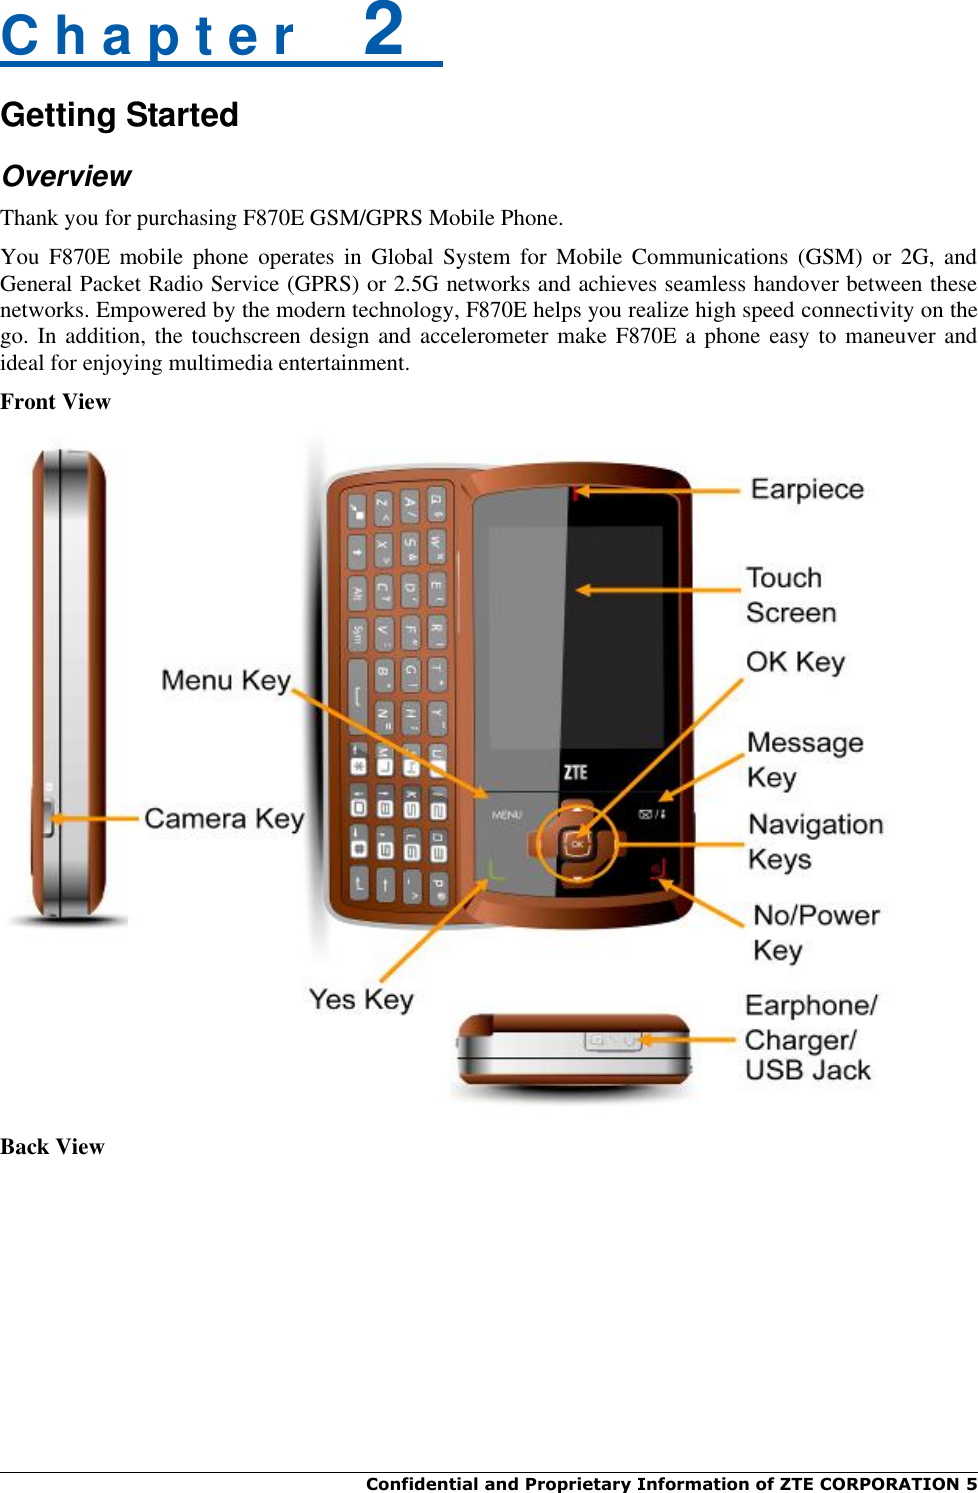  Confidential and Proprietary Information of ZTE CORPORATION 5    C h a p t e r    2   Getting Started Overview Thank you for purchasing F870E GSM/GPRS Mobile Phone. You  F870E  mobile  phone  operates  in  Global  System  for  Mobile  Communications  (GSM)  or  2G,  and General Packet Radio Service (GPRS) or 2.5G networks and achieves seamless handover between these networks. Empowered by the modern technology, F870E helps you realize high speed connectivity on the go. In addition, the touchscreen design and accelerometer  make F870E a phone easy to maneuver and ideal for enjoying multimedia entertainment. Front View  Back View 